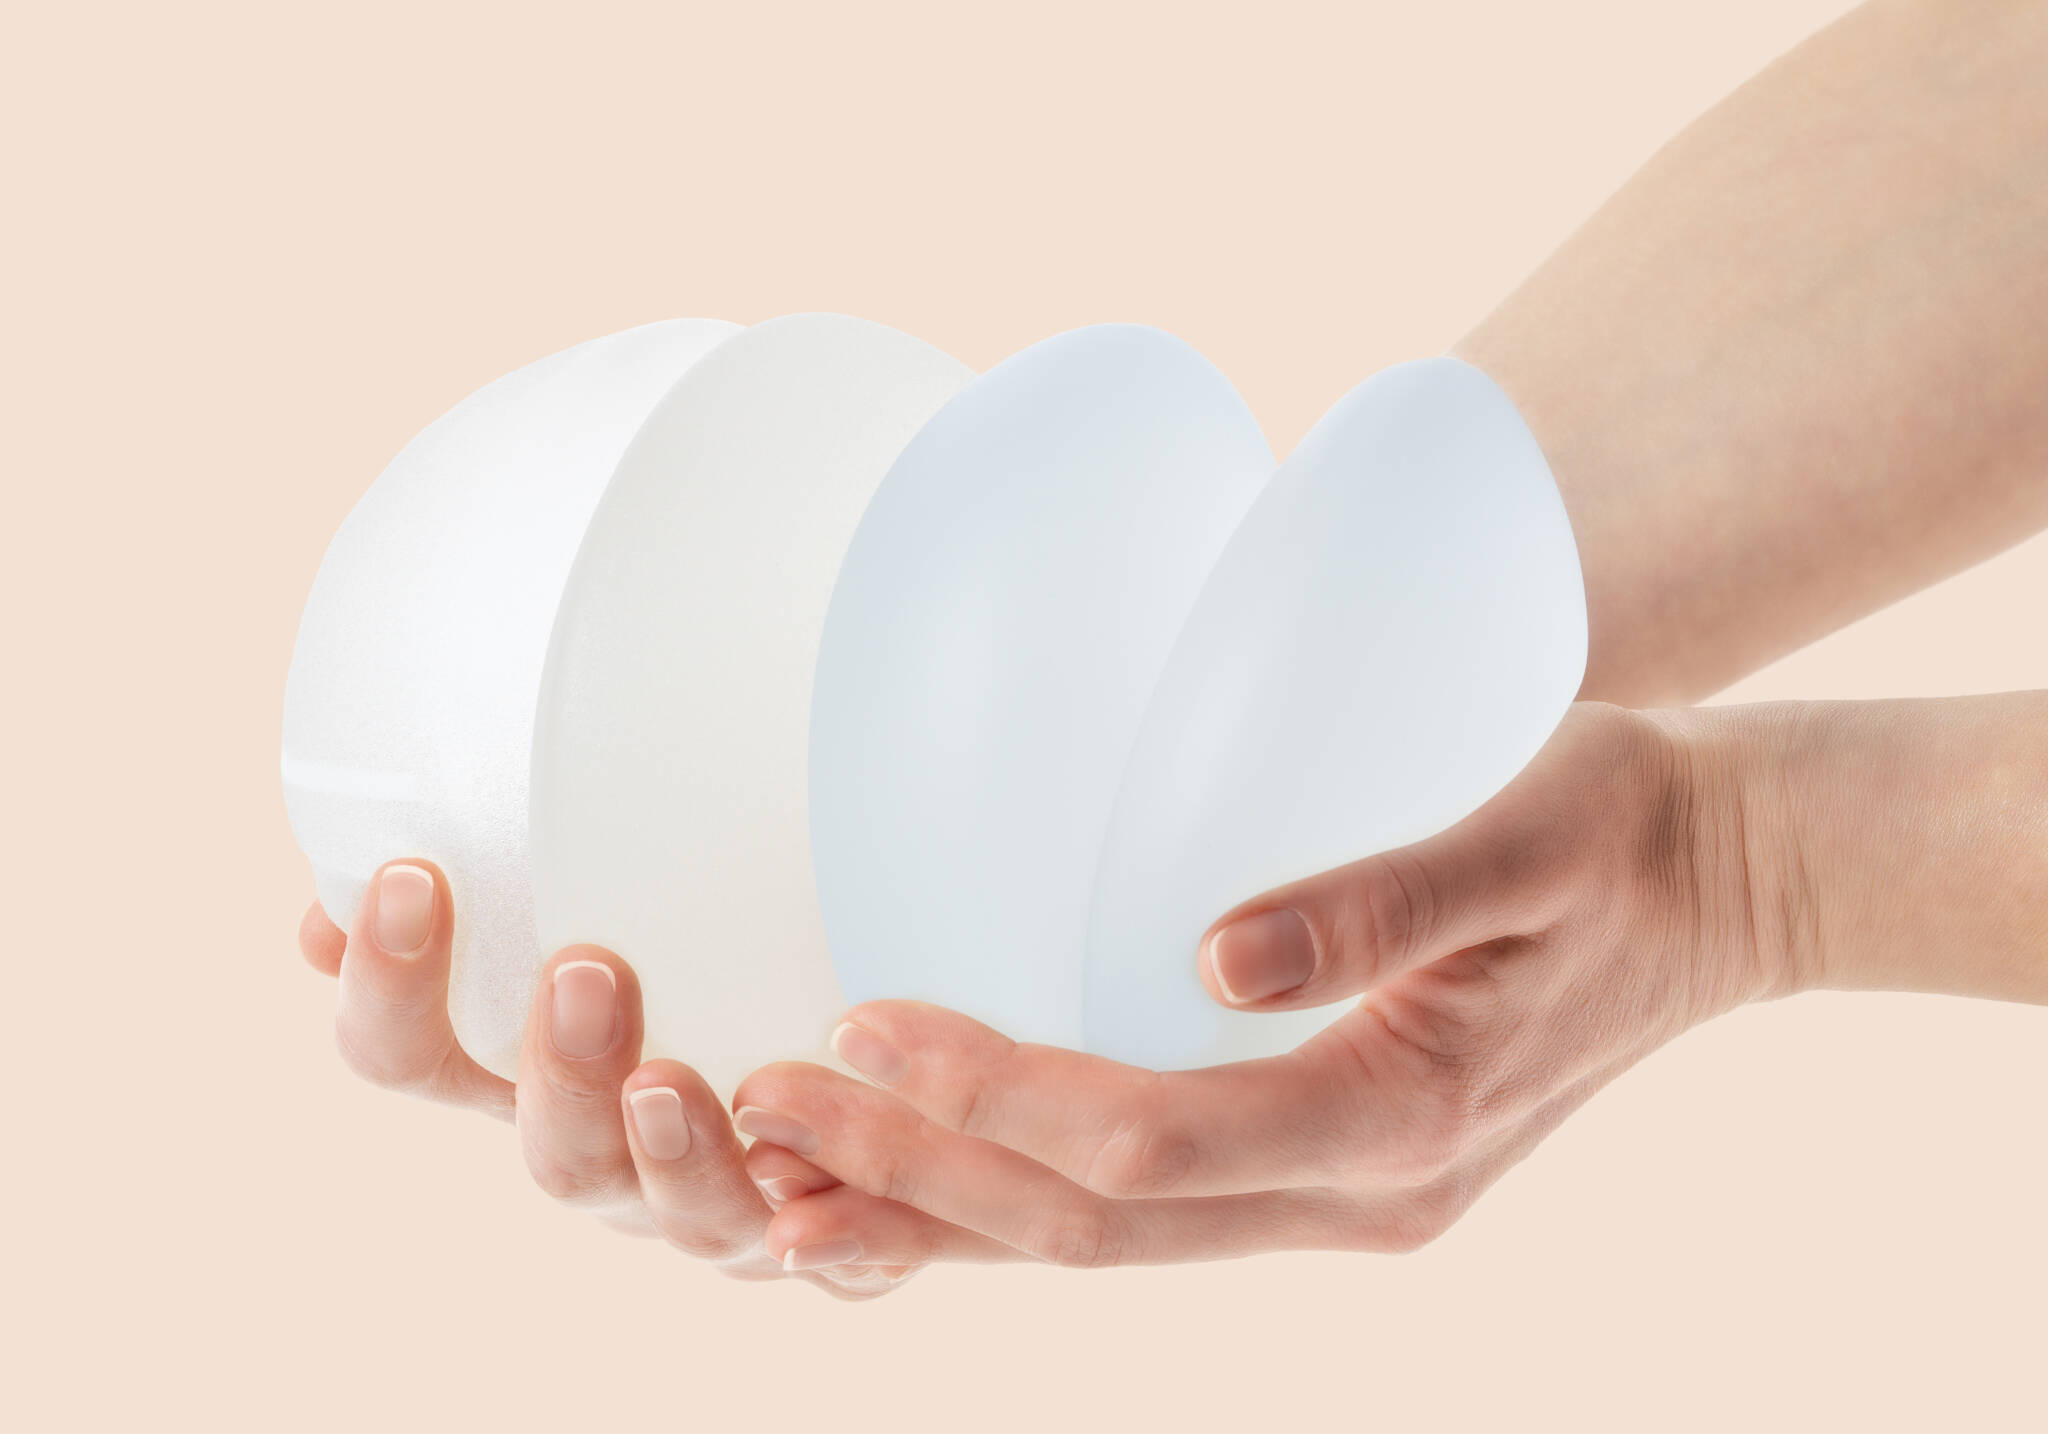 Female hands holding stack of different types of breast implants.